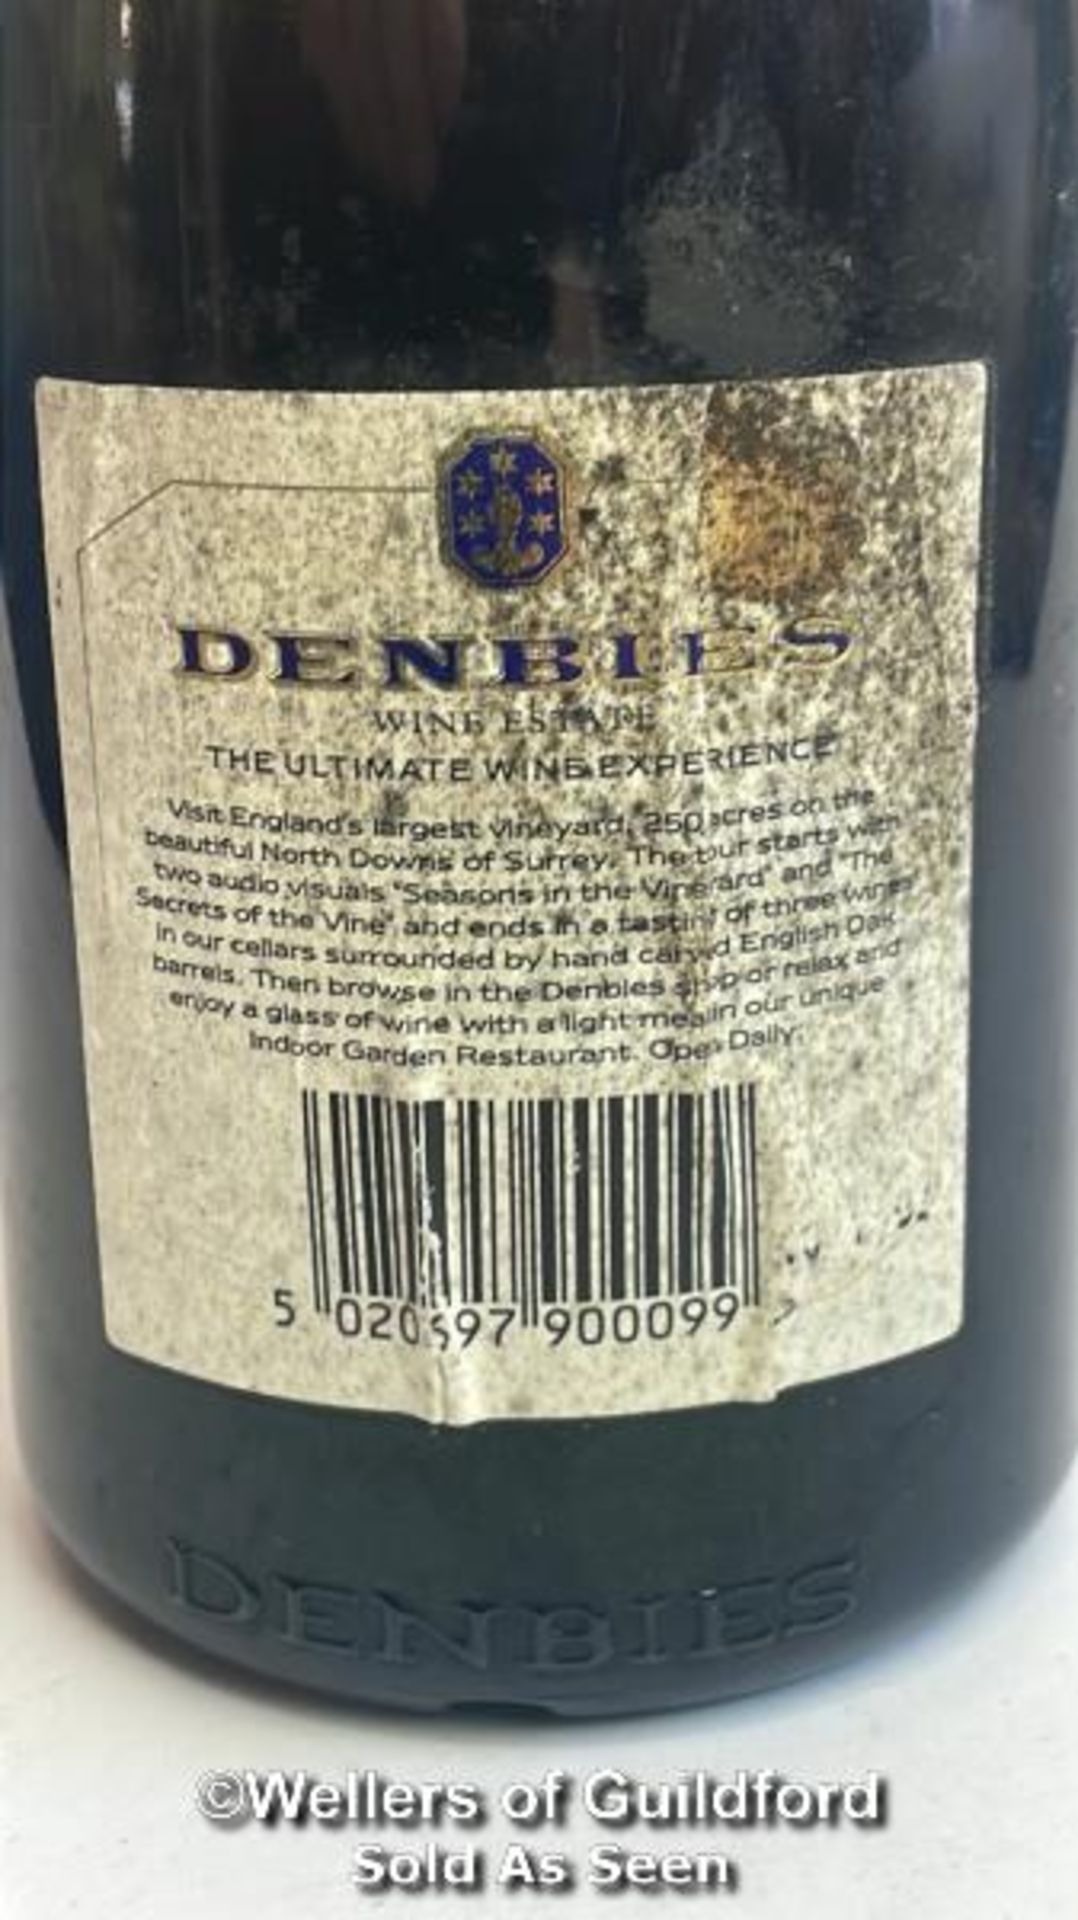 1992 Denbies Pino Gris, 75cl, 10.5% vol / Please see images for fill level and general condition. - Image 4 of 5